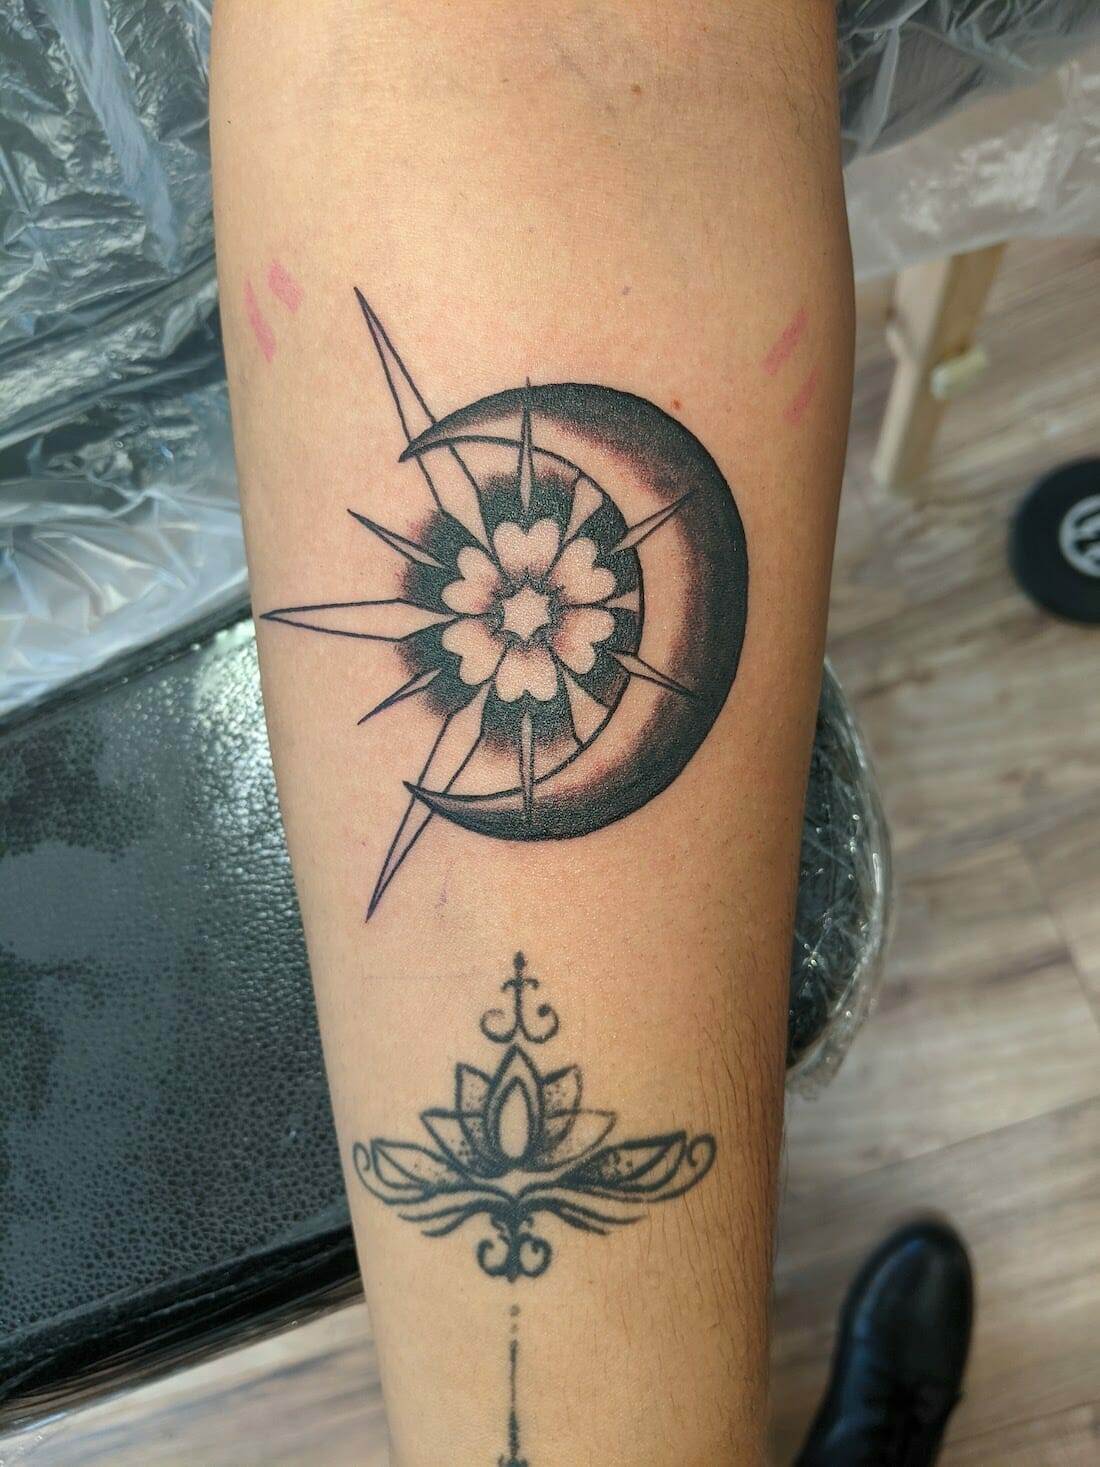 Compass Tattoo Designs: Symbolism and Style in Focus